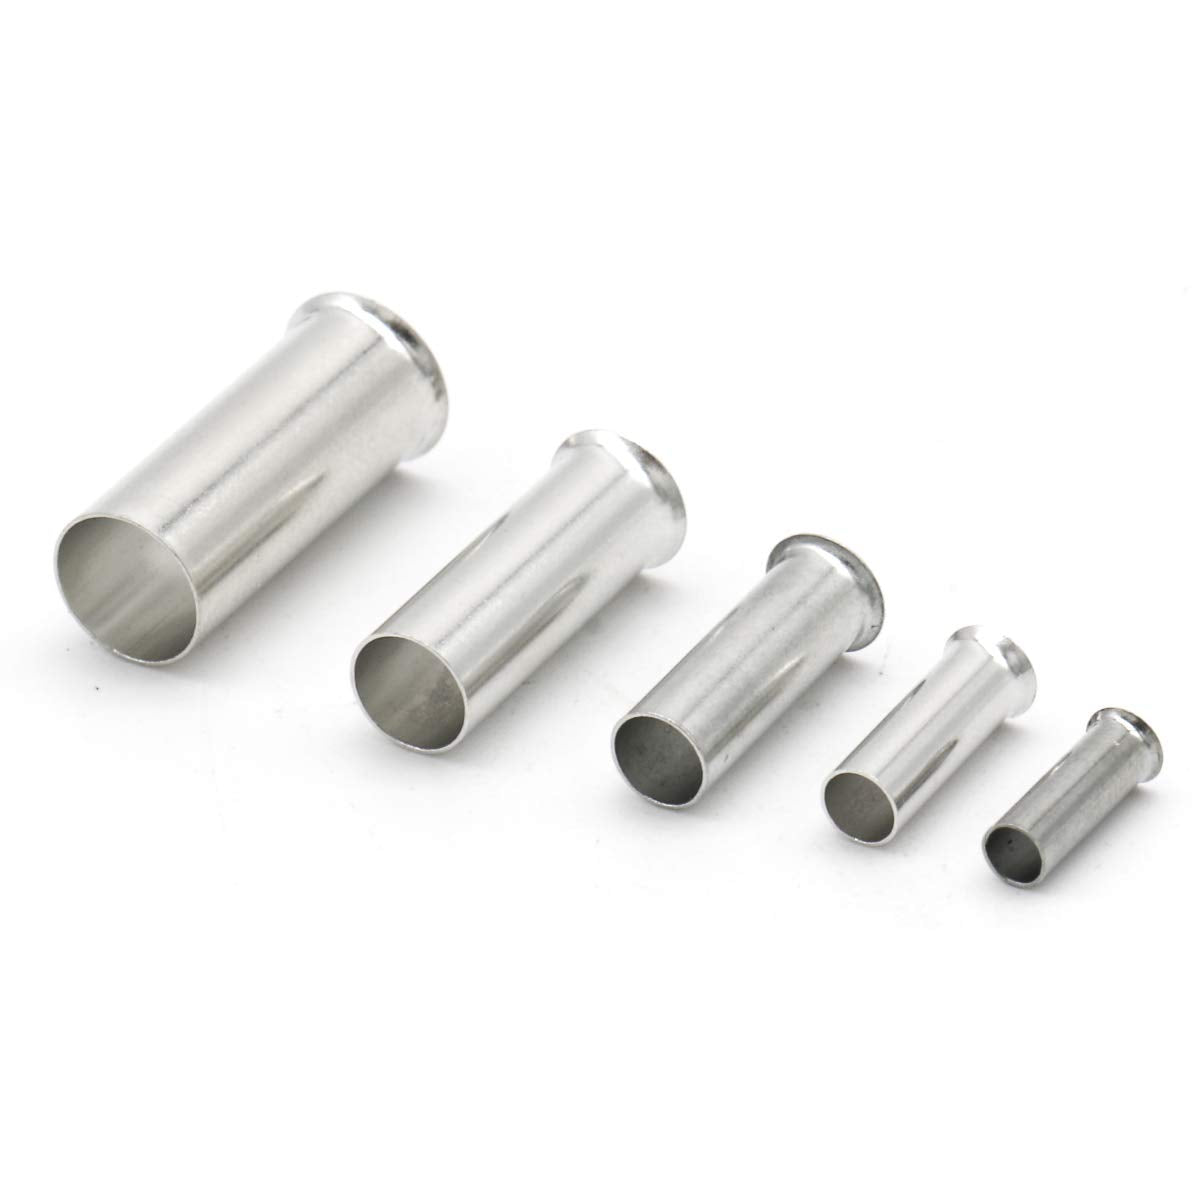 3Types Gauge Ferrule: AWG 4,6,8, Non Insulated Cable Housing Ferrule Pin Cord End Terminal Kit.Widely Used in Automotive Aircraft Boat Truck Stereo Wire Joint Wire Copper Crimp Ferrules